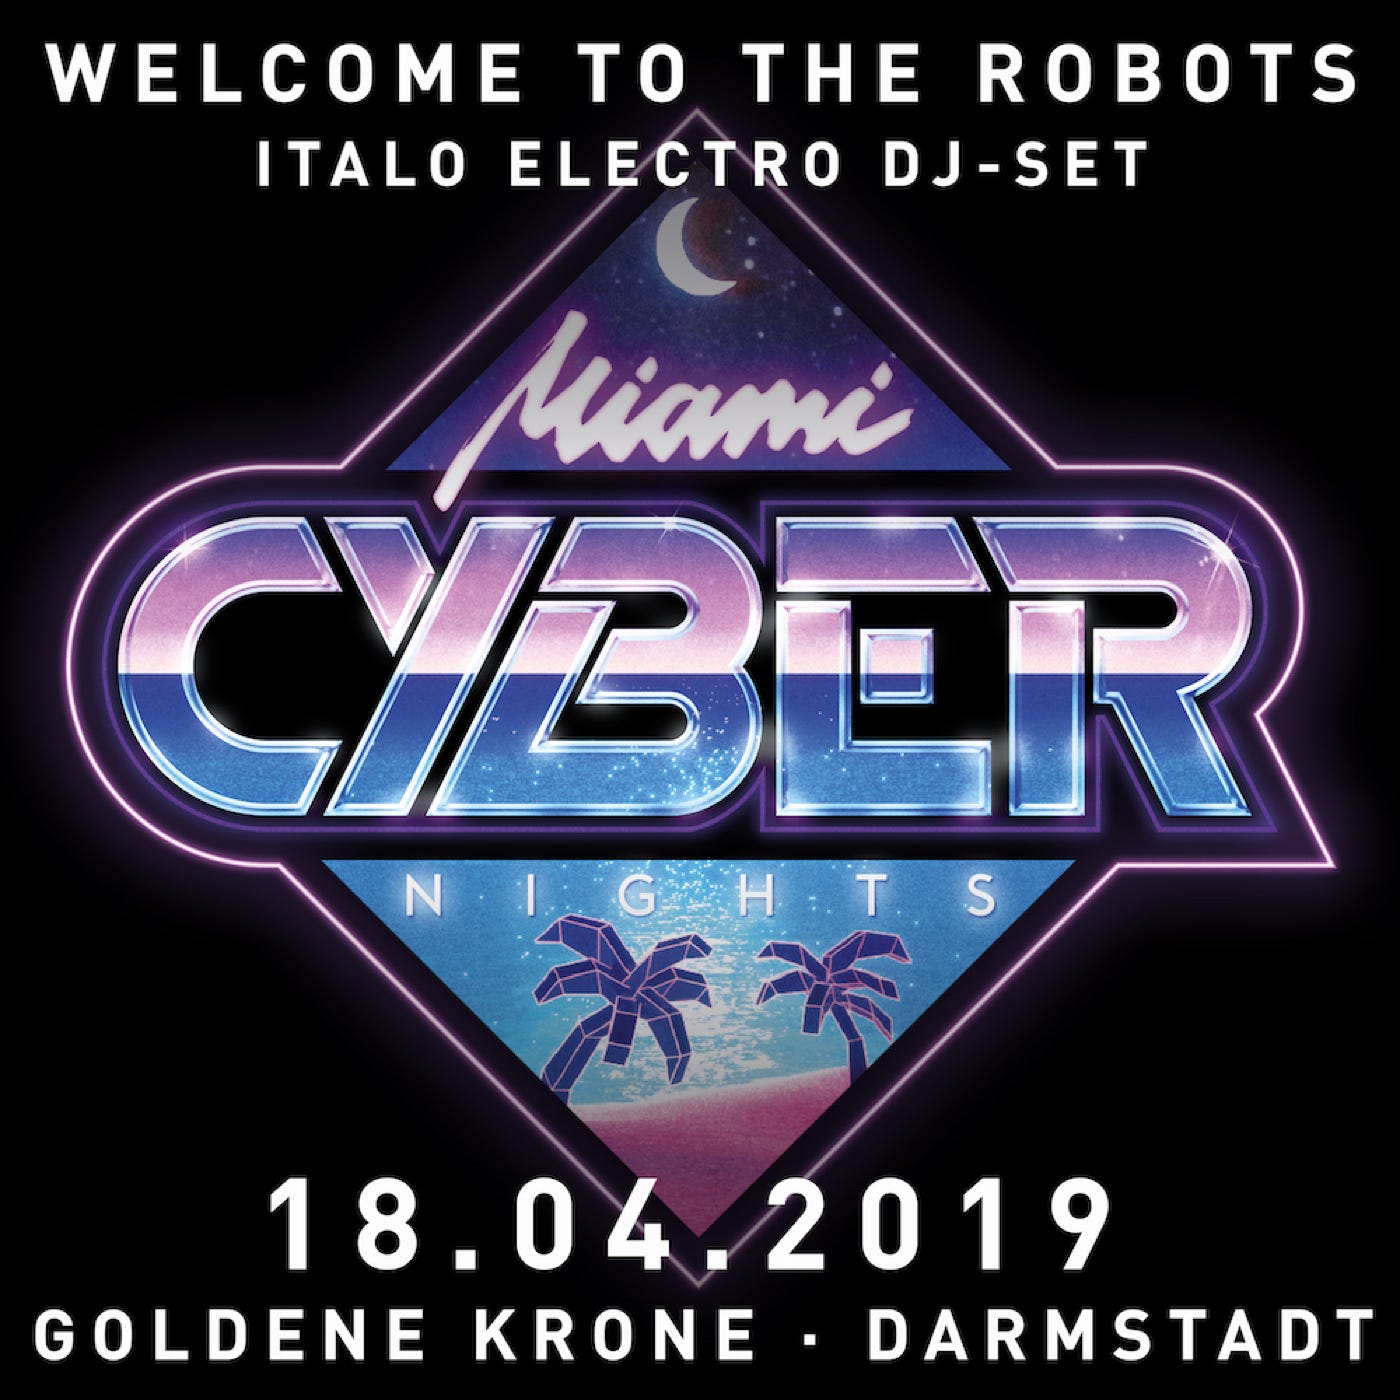 Welcome To The Robots at Goldene Krone Darmstadt 18.04.2019 Miami Cyber Nights